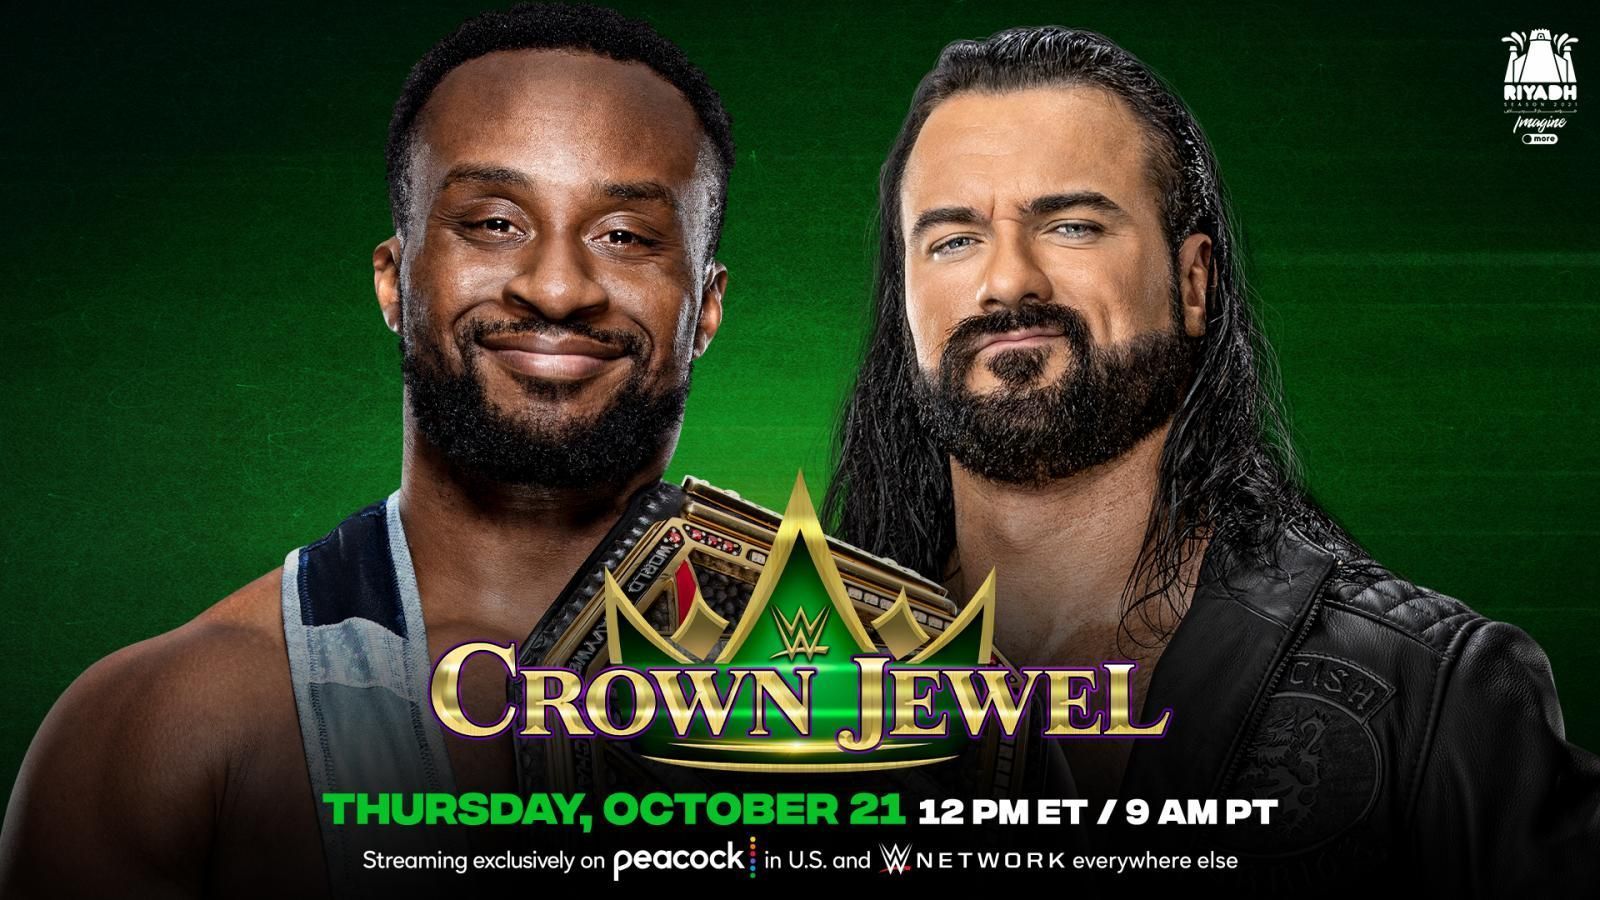 Will Big E reign supreme or will DrewMcIntyre become champion again at Crown Jewel?